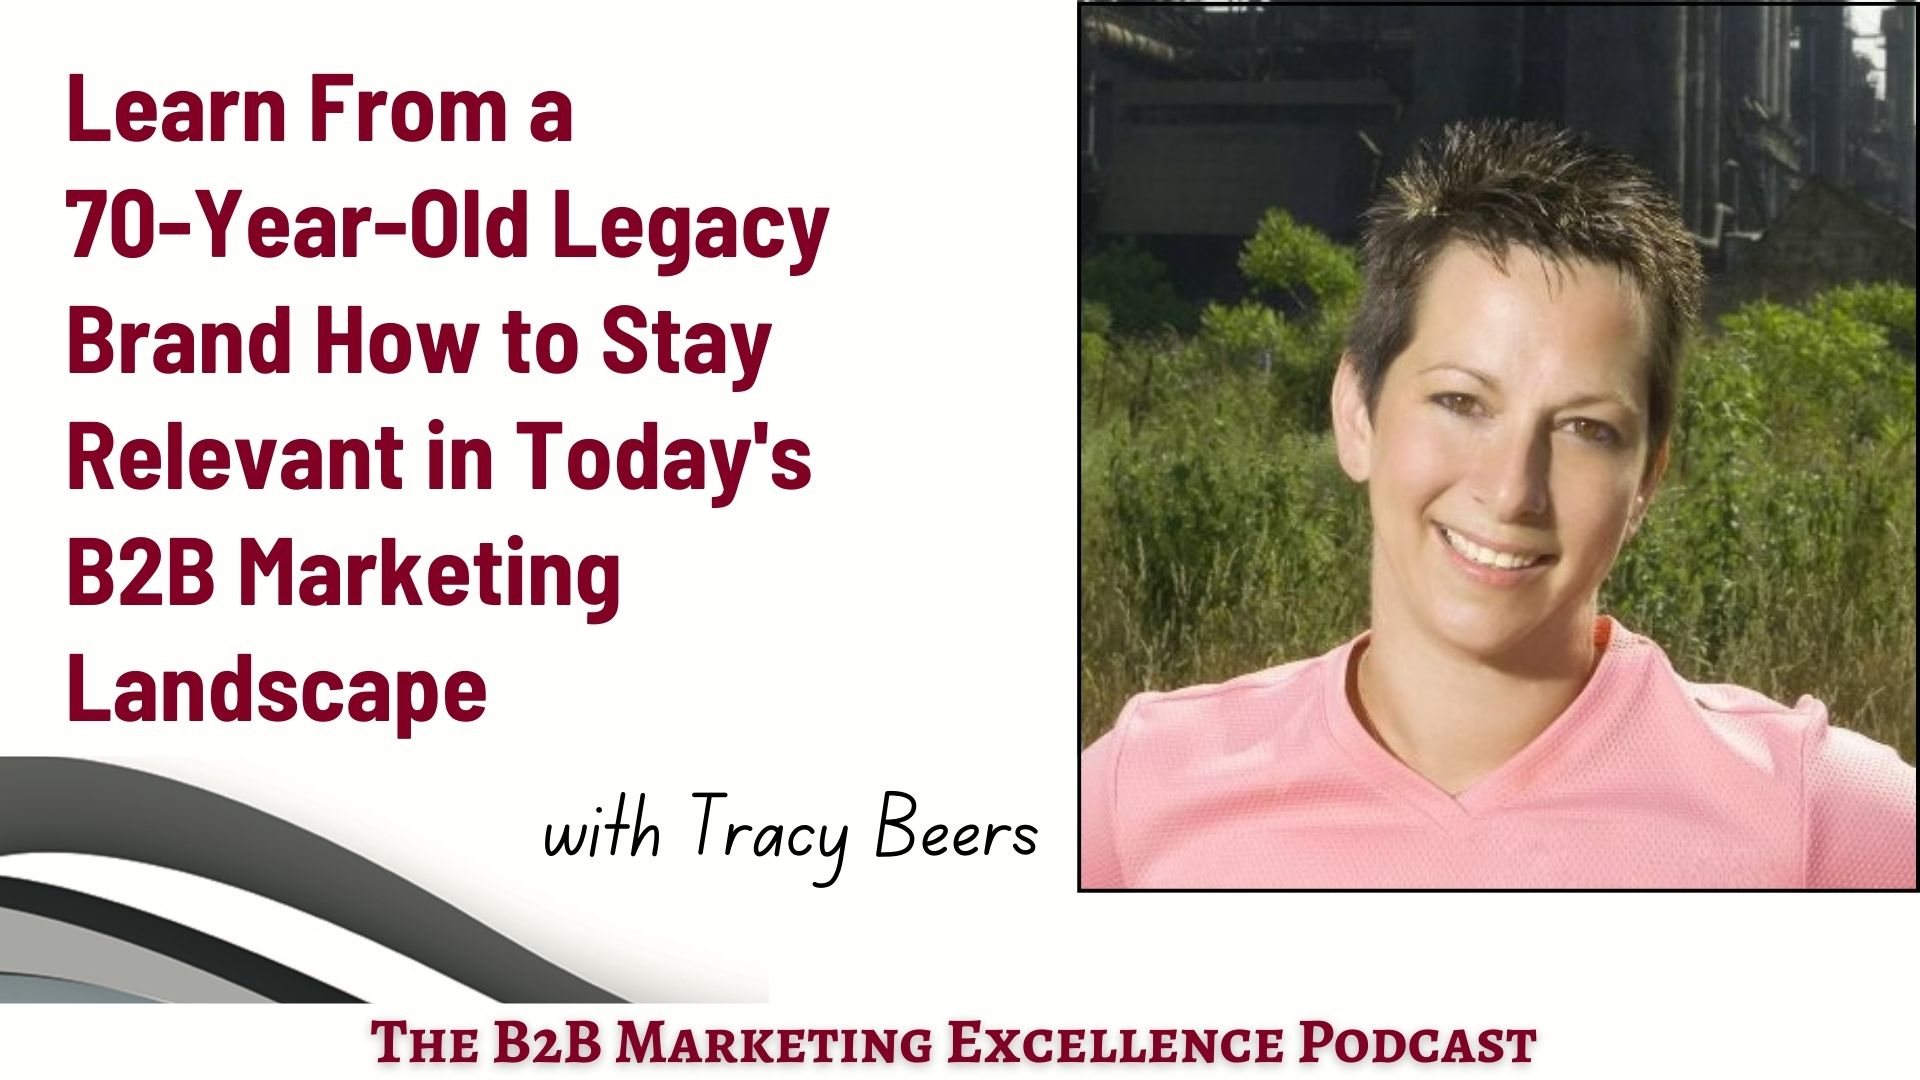 Podcast – Learn From a 70-Year-Old Legacy Brand How to Stay Relevant in Today’s B2B Marketing Landscape